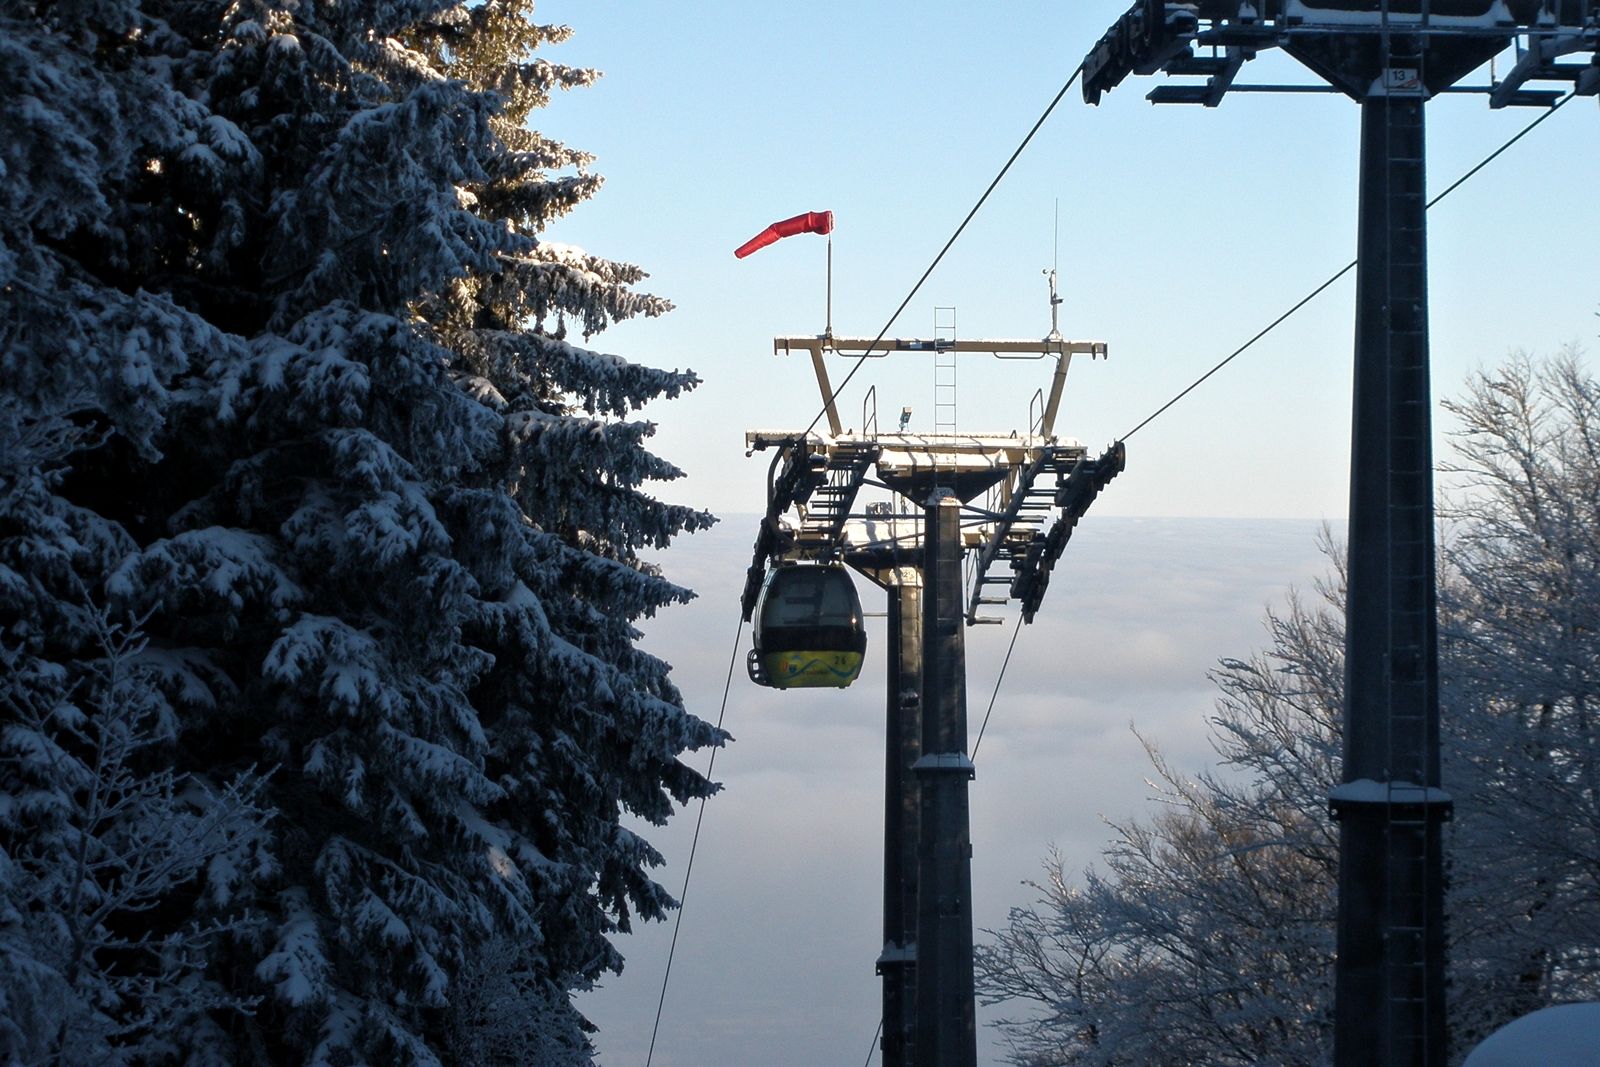 Wagon reaching the top station in winter